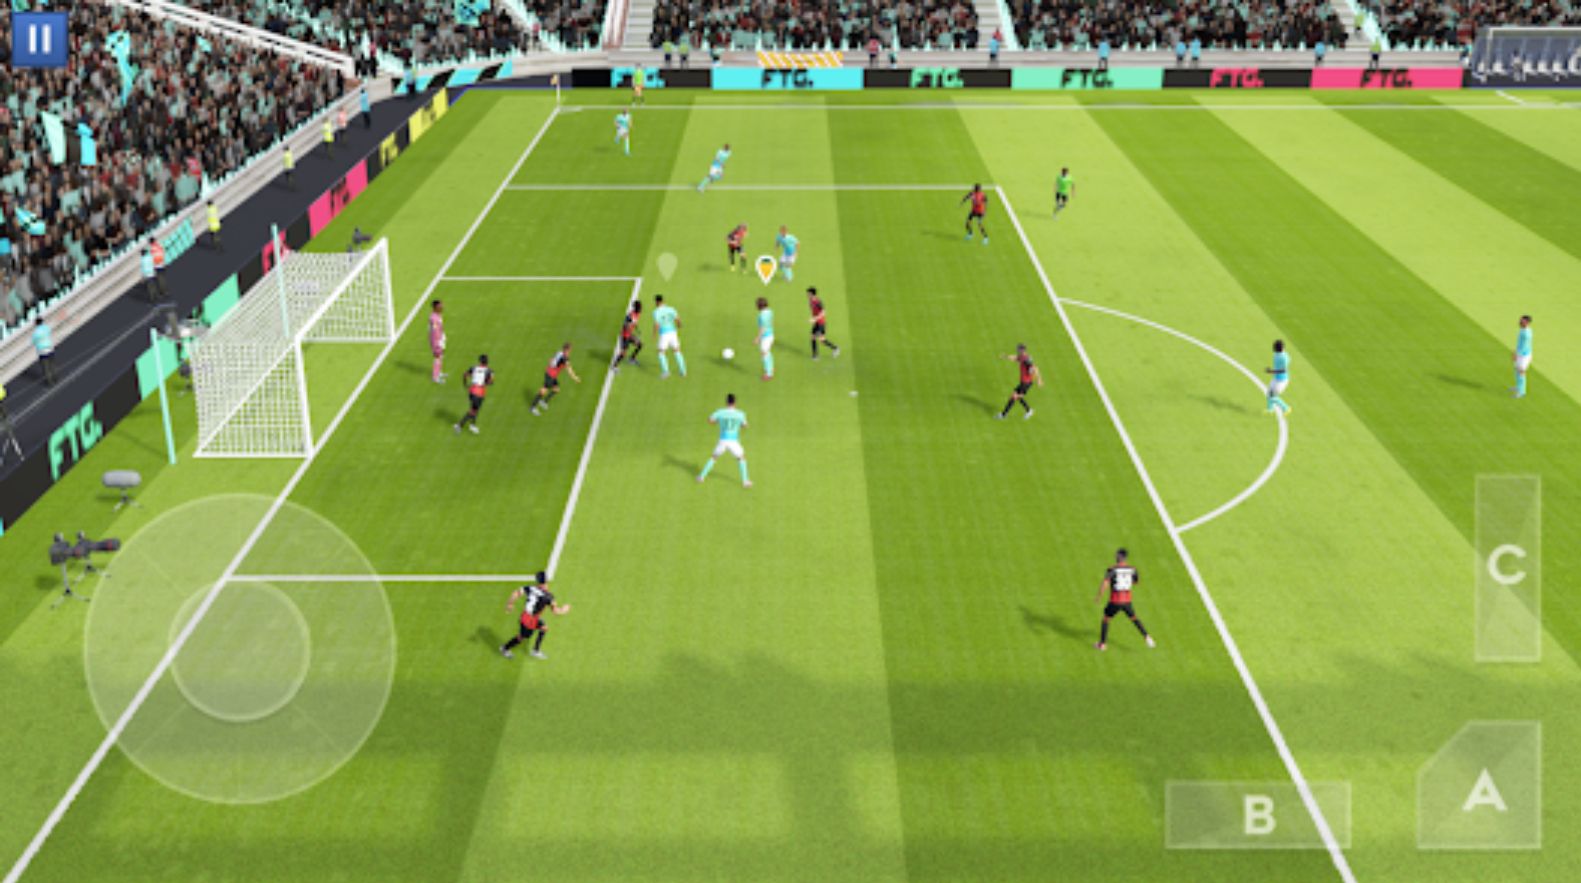 Dream League Soccer in-game image of a team in blue and white attacking a team in red and black's box.